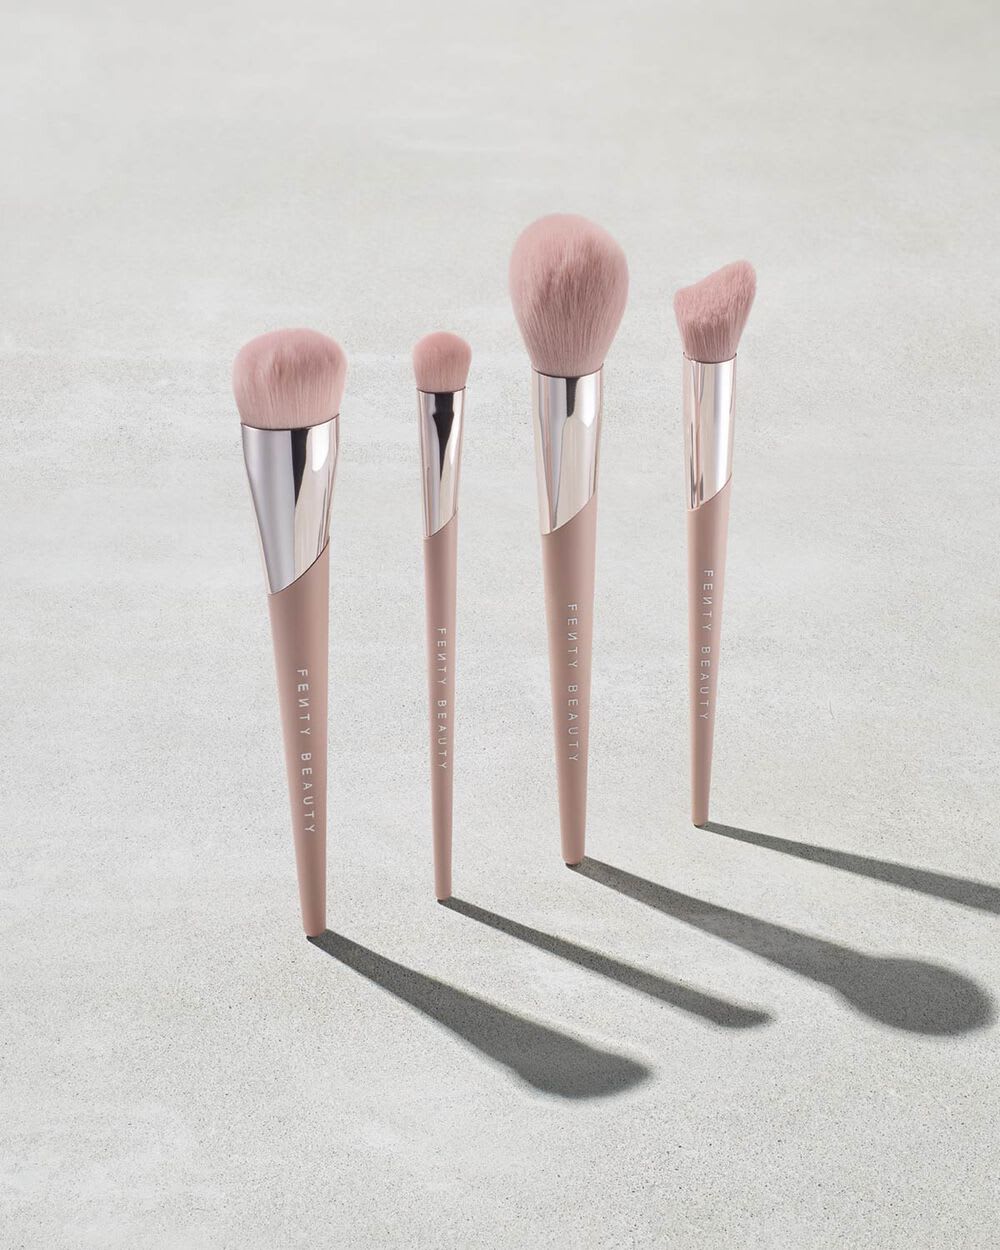 by dyd astronomi The 18 best makeup brushes and brush sets - TODAY